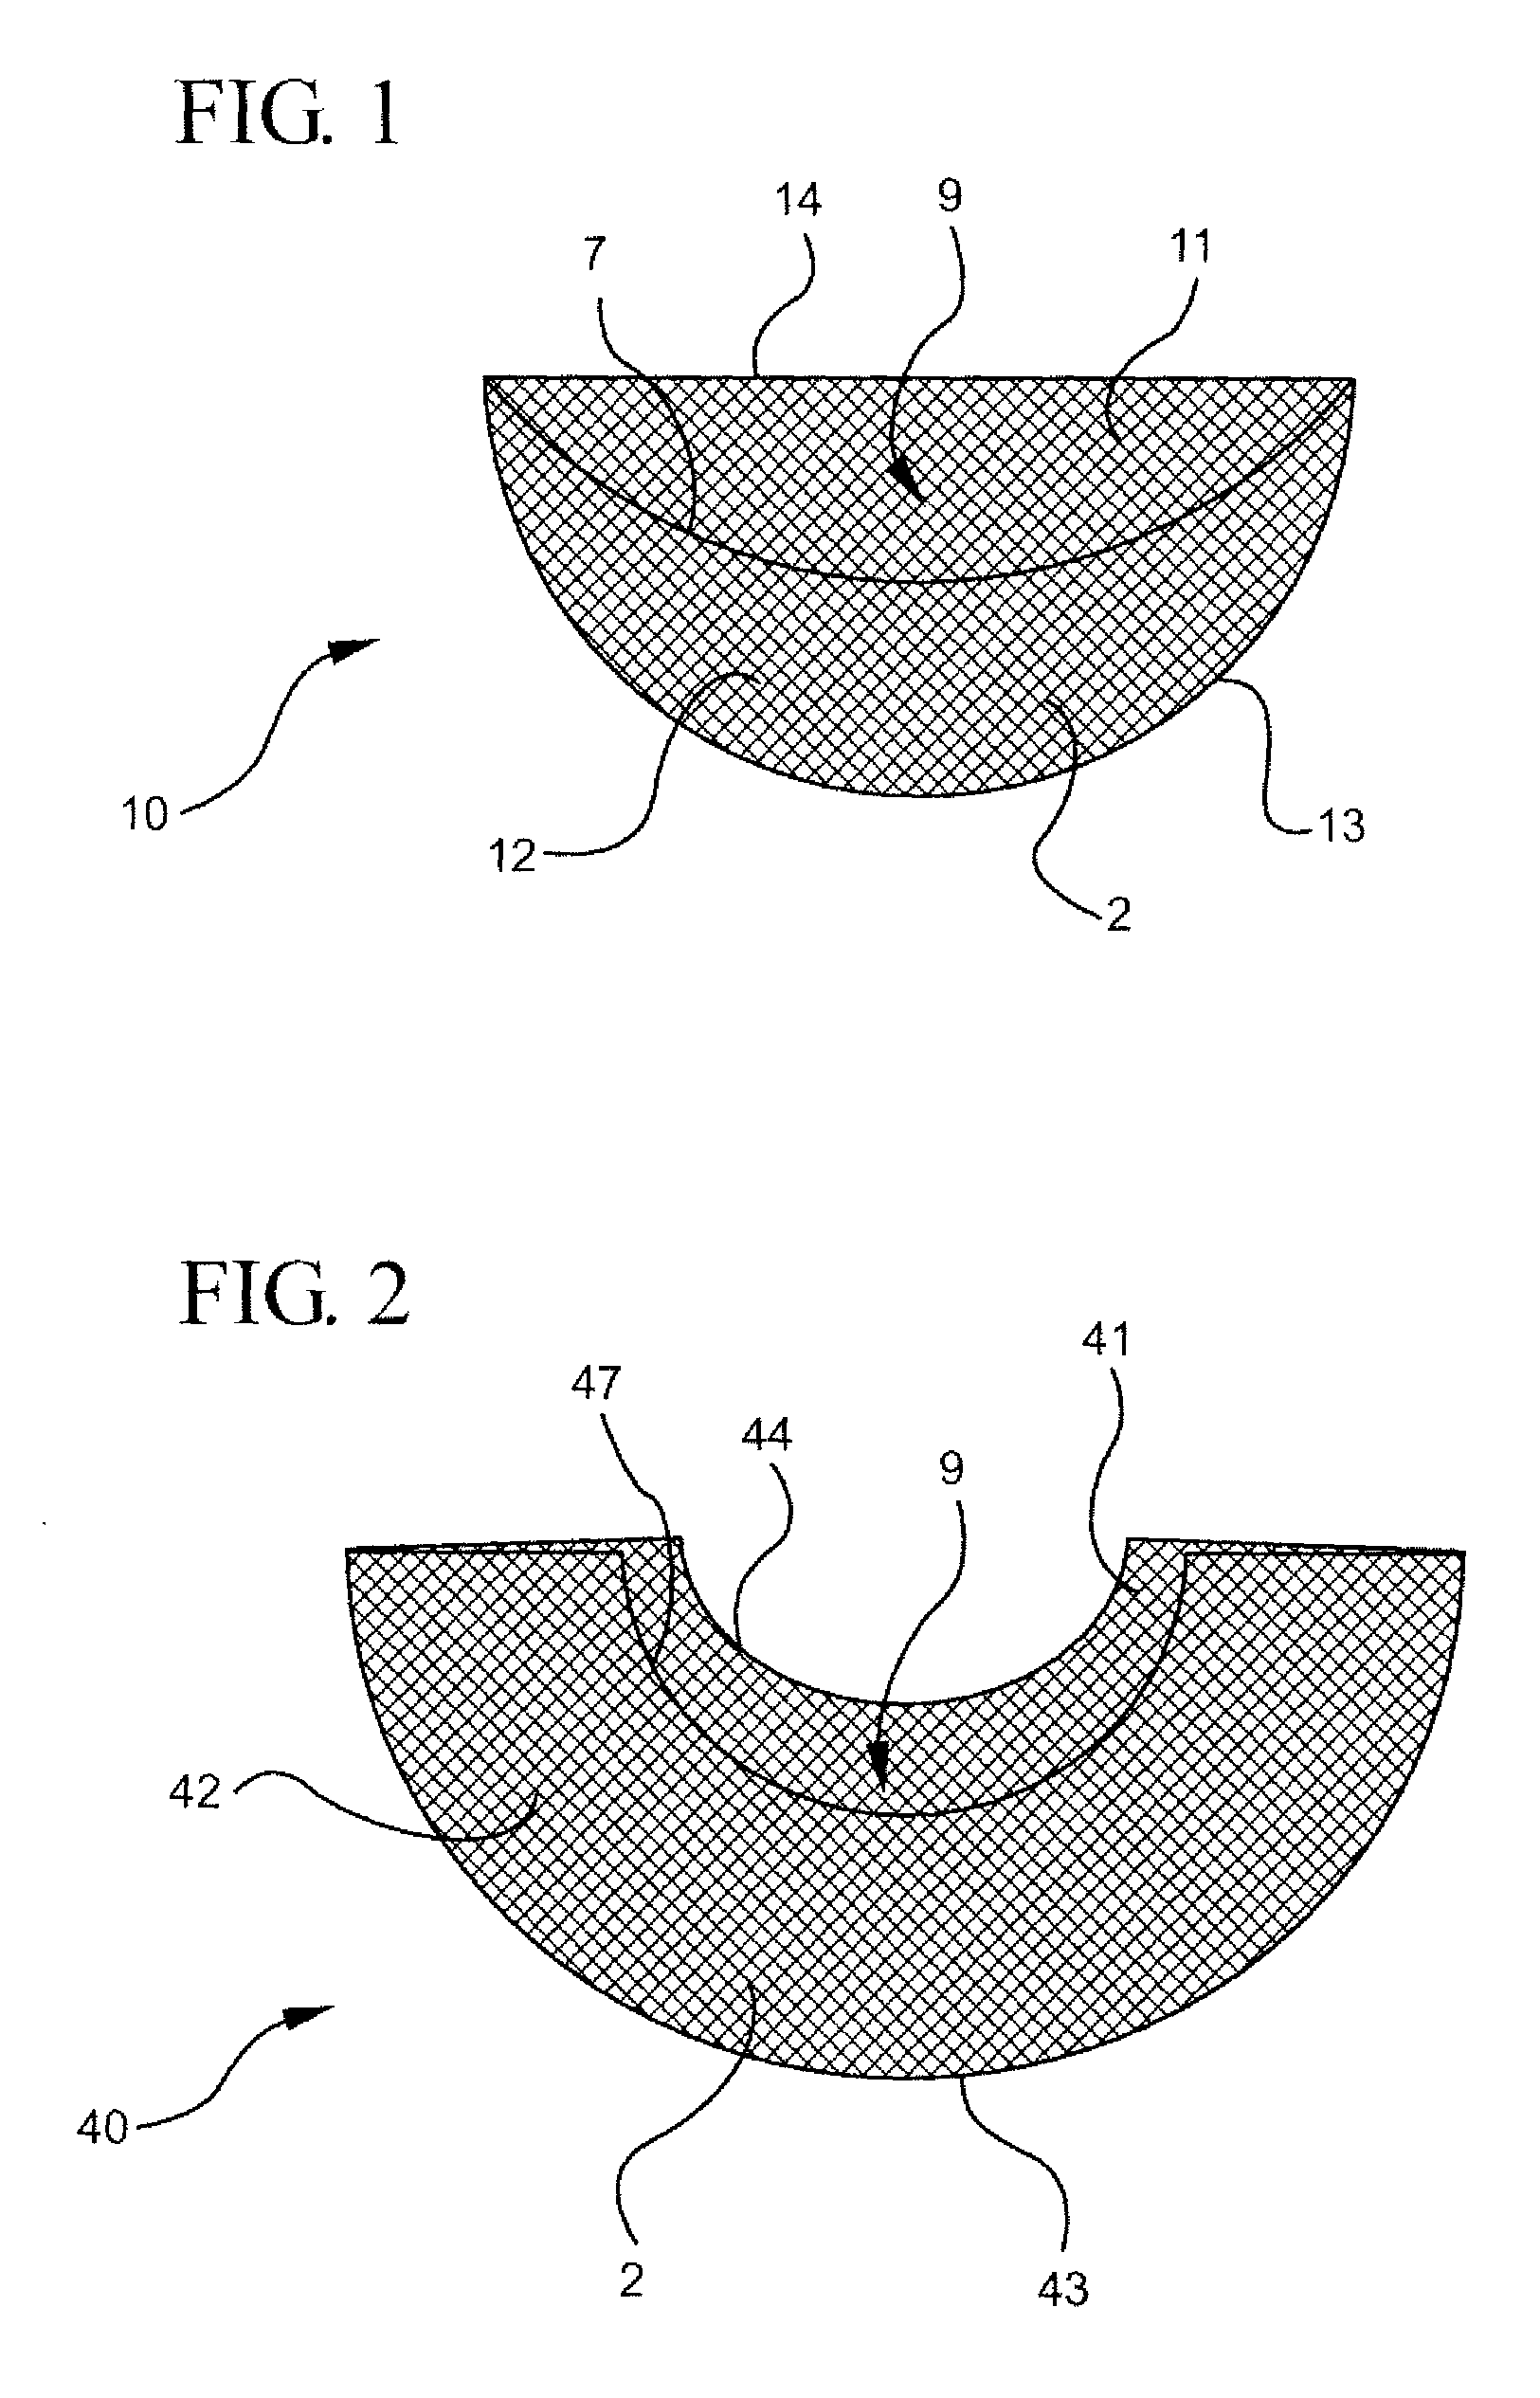 Naturally contoured, preformed, three dimensional mesh device for breast implant support